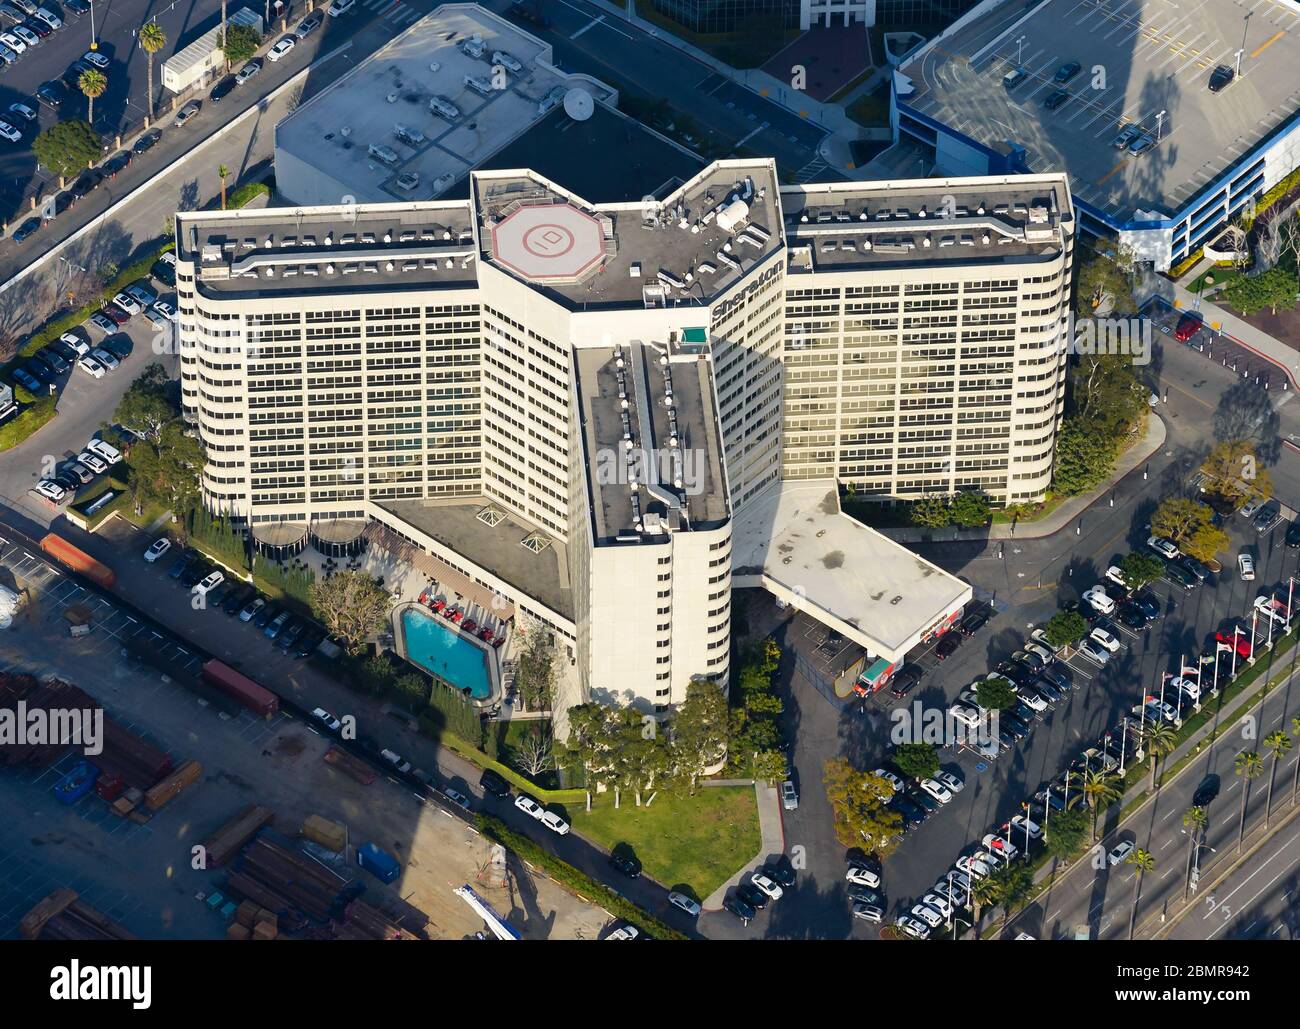 Sheraton Gateway Los Angeles Hotel LAX airport in United States. Aerial view of hotel with a pool in California, USA. Located in Century Boulevard. Stock Photo